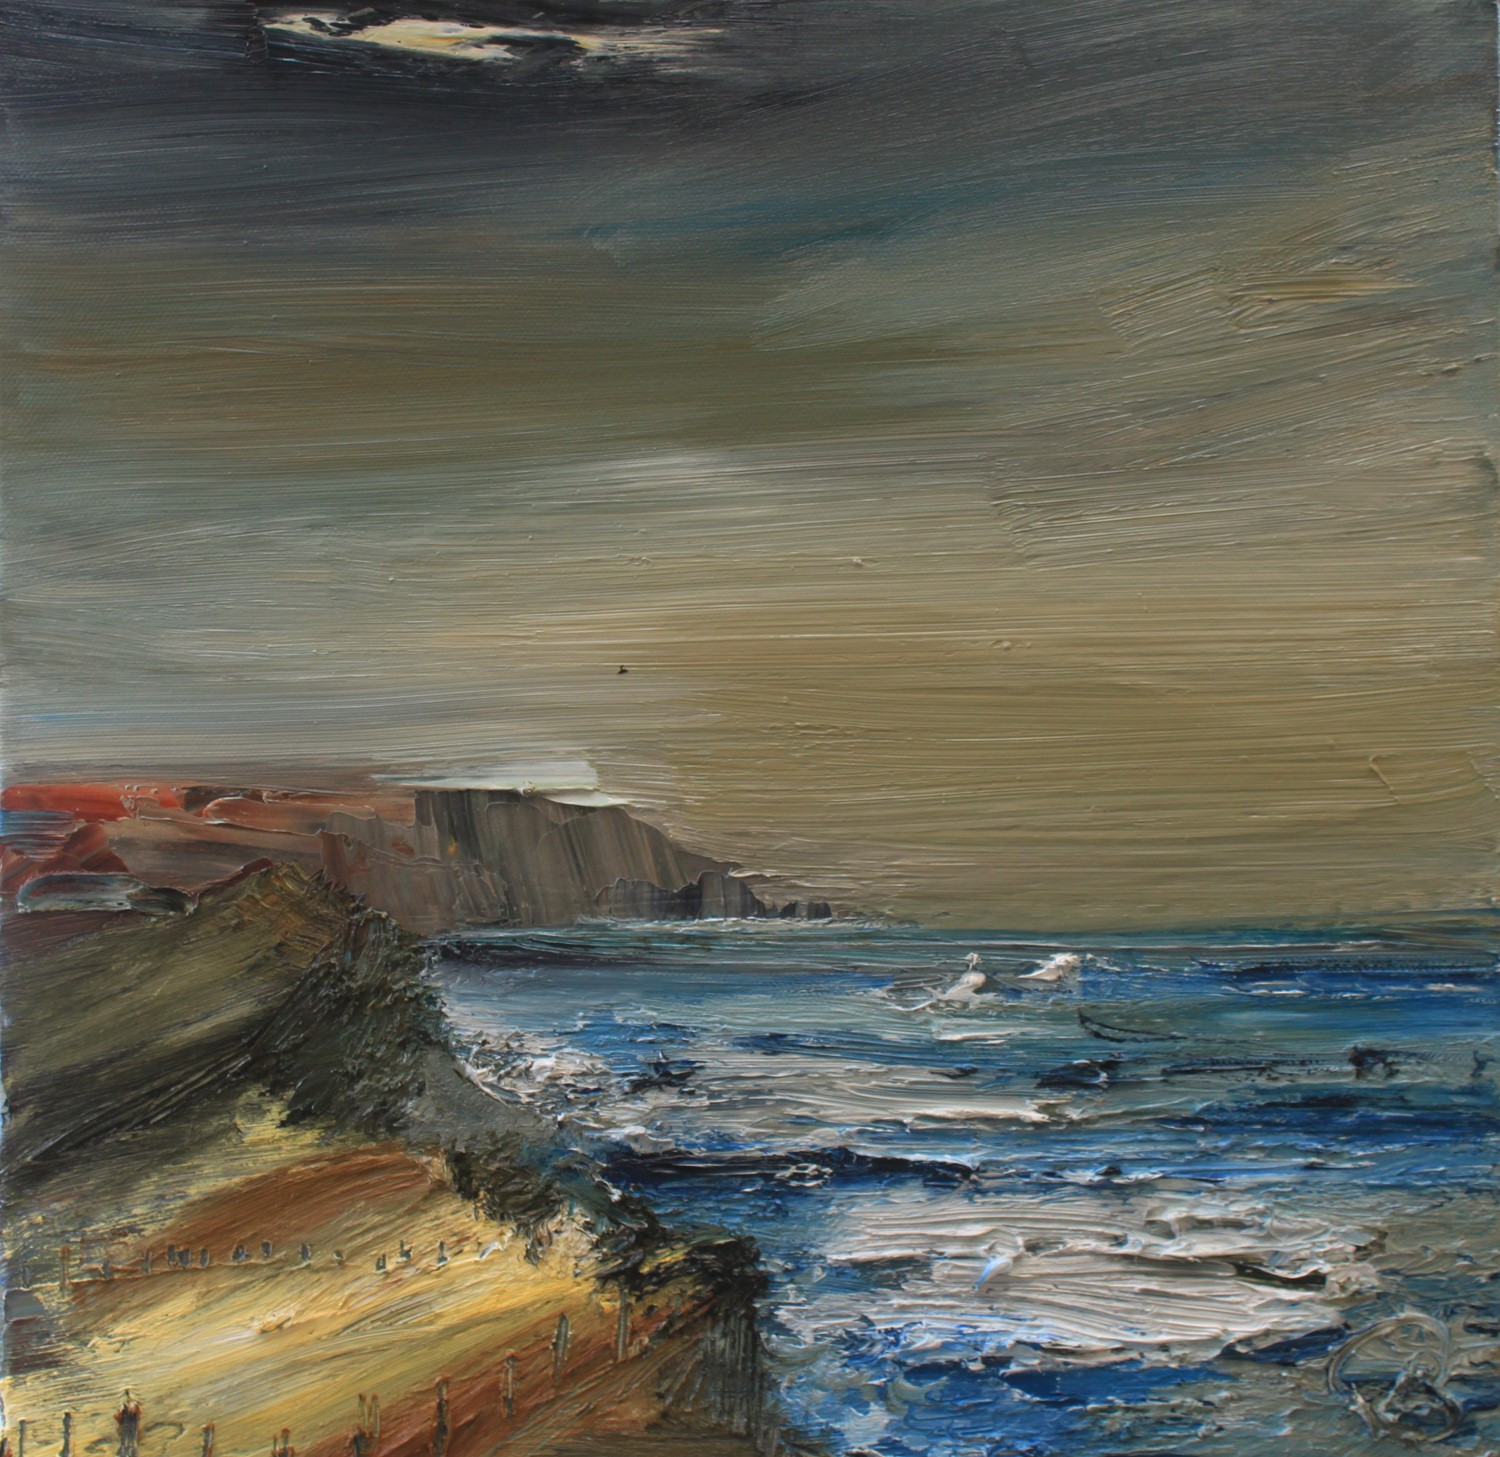 'The Cliffs of Orkney' by artist Rosanne Barr